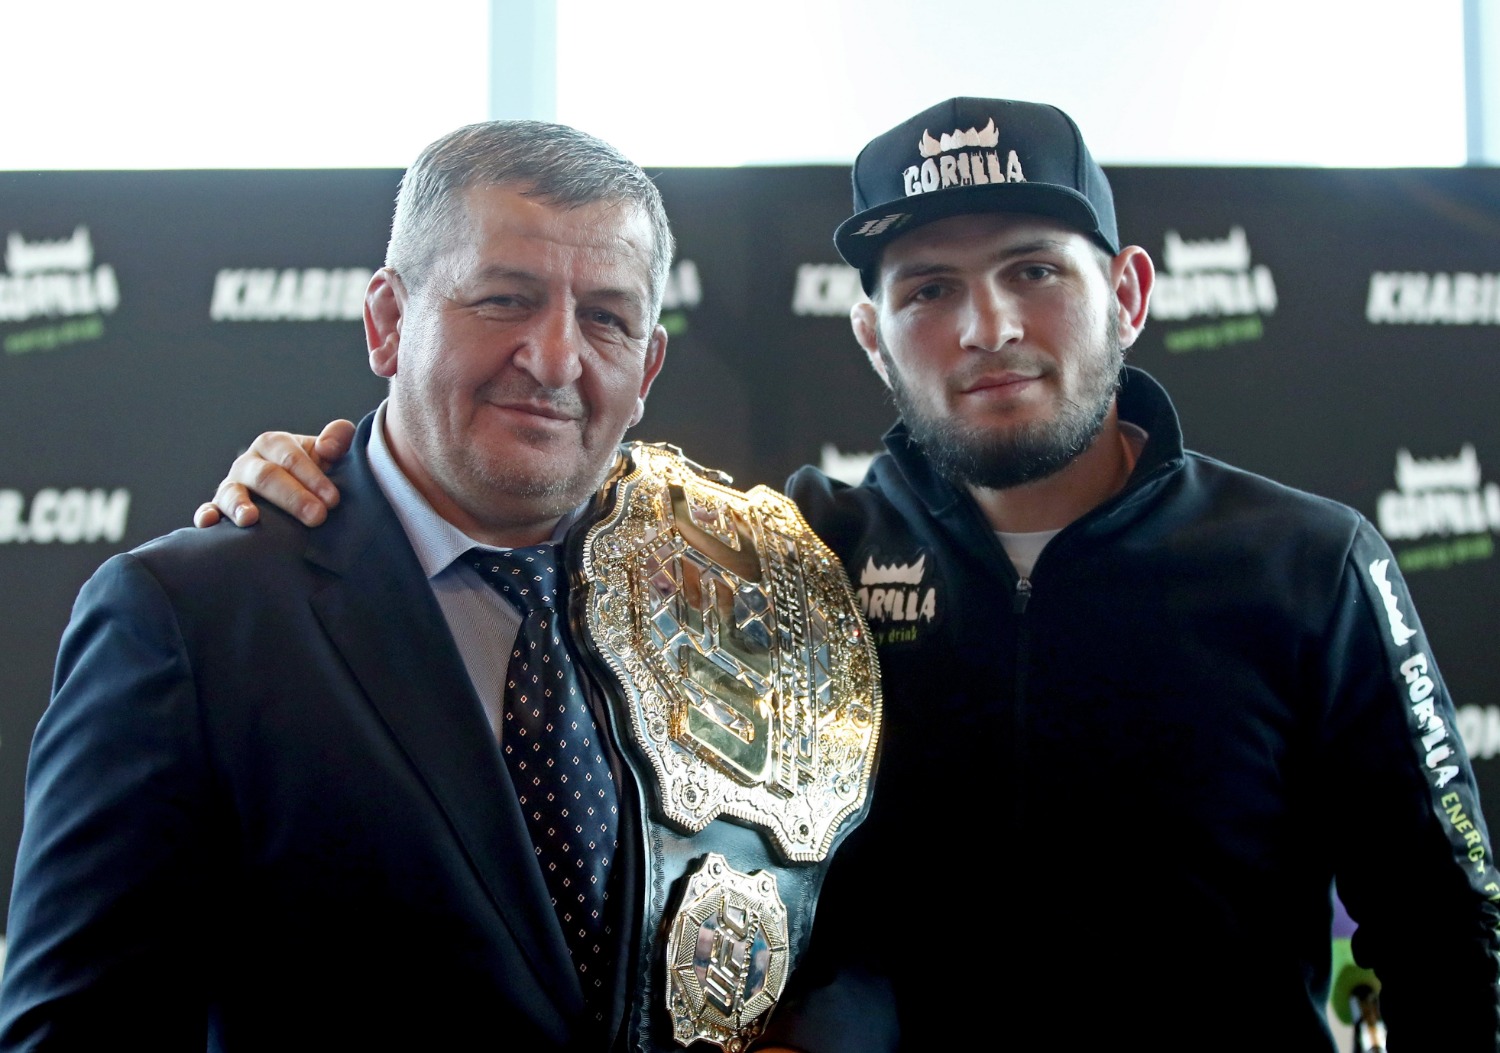 Khabib Nurmagomedov suffered a devastating loss with the tragic death of his father and trainer Abdulmanap Nurmagomedov on Friday.